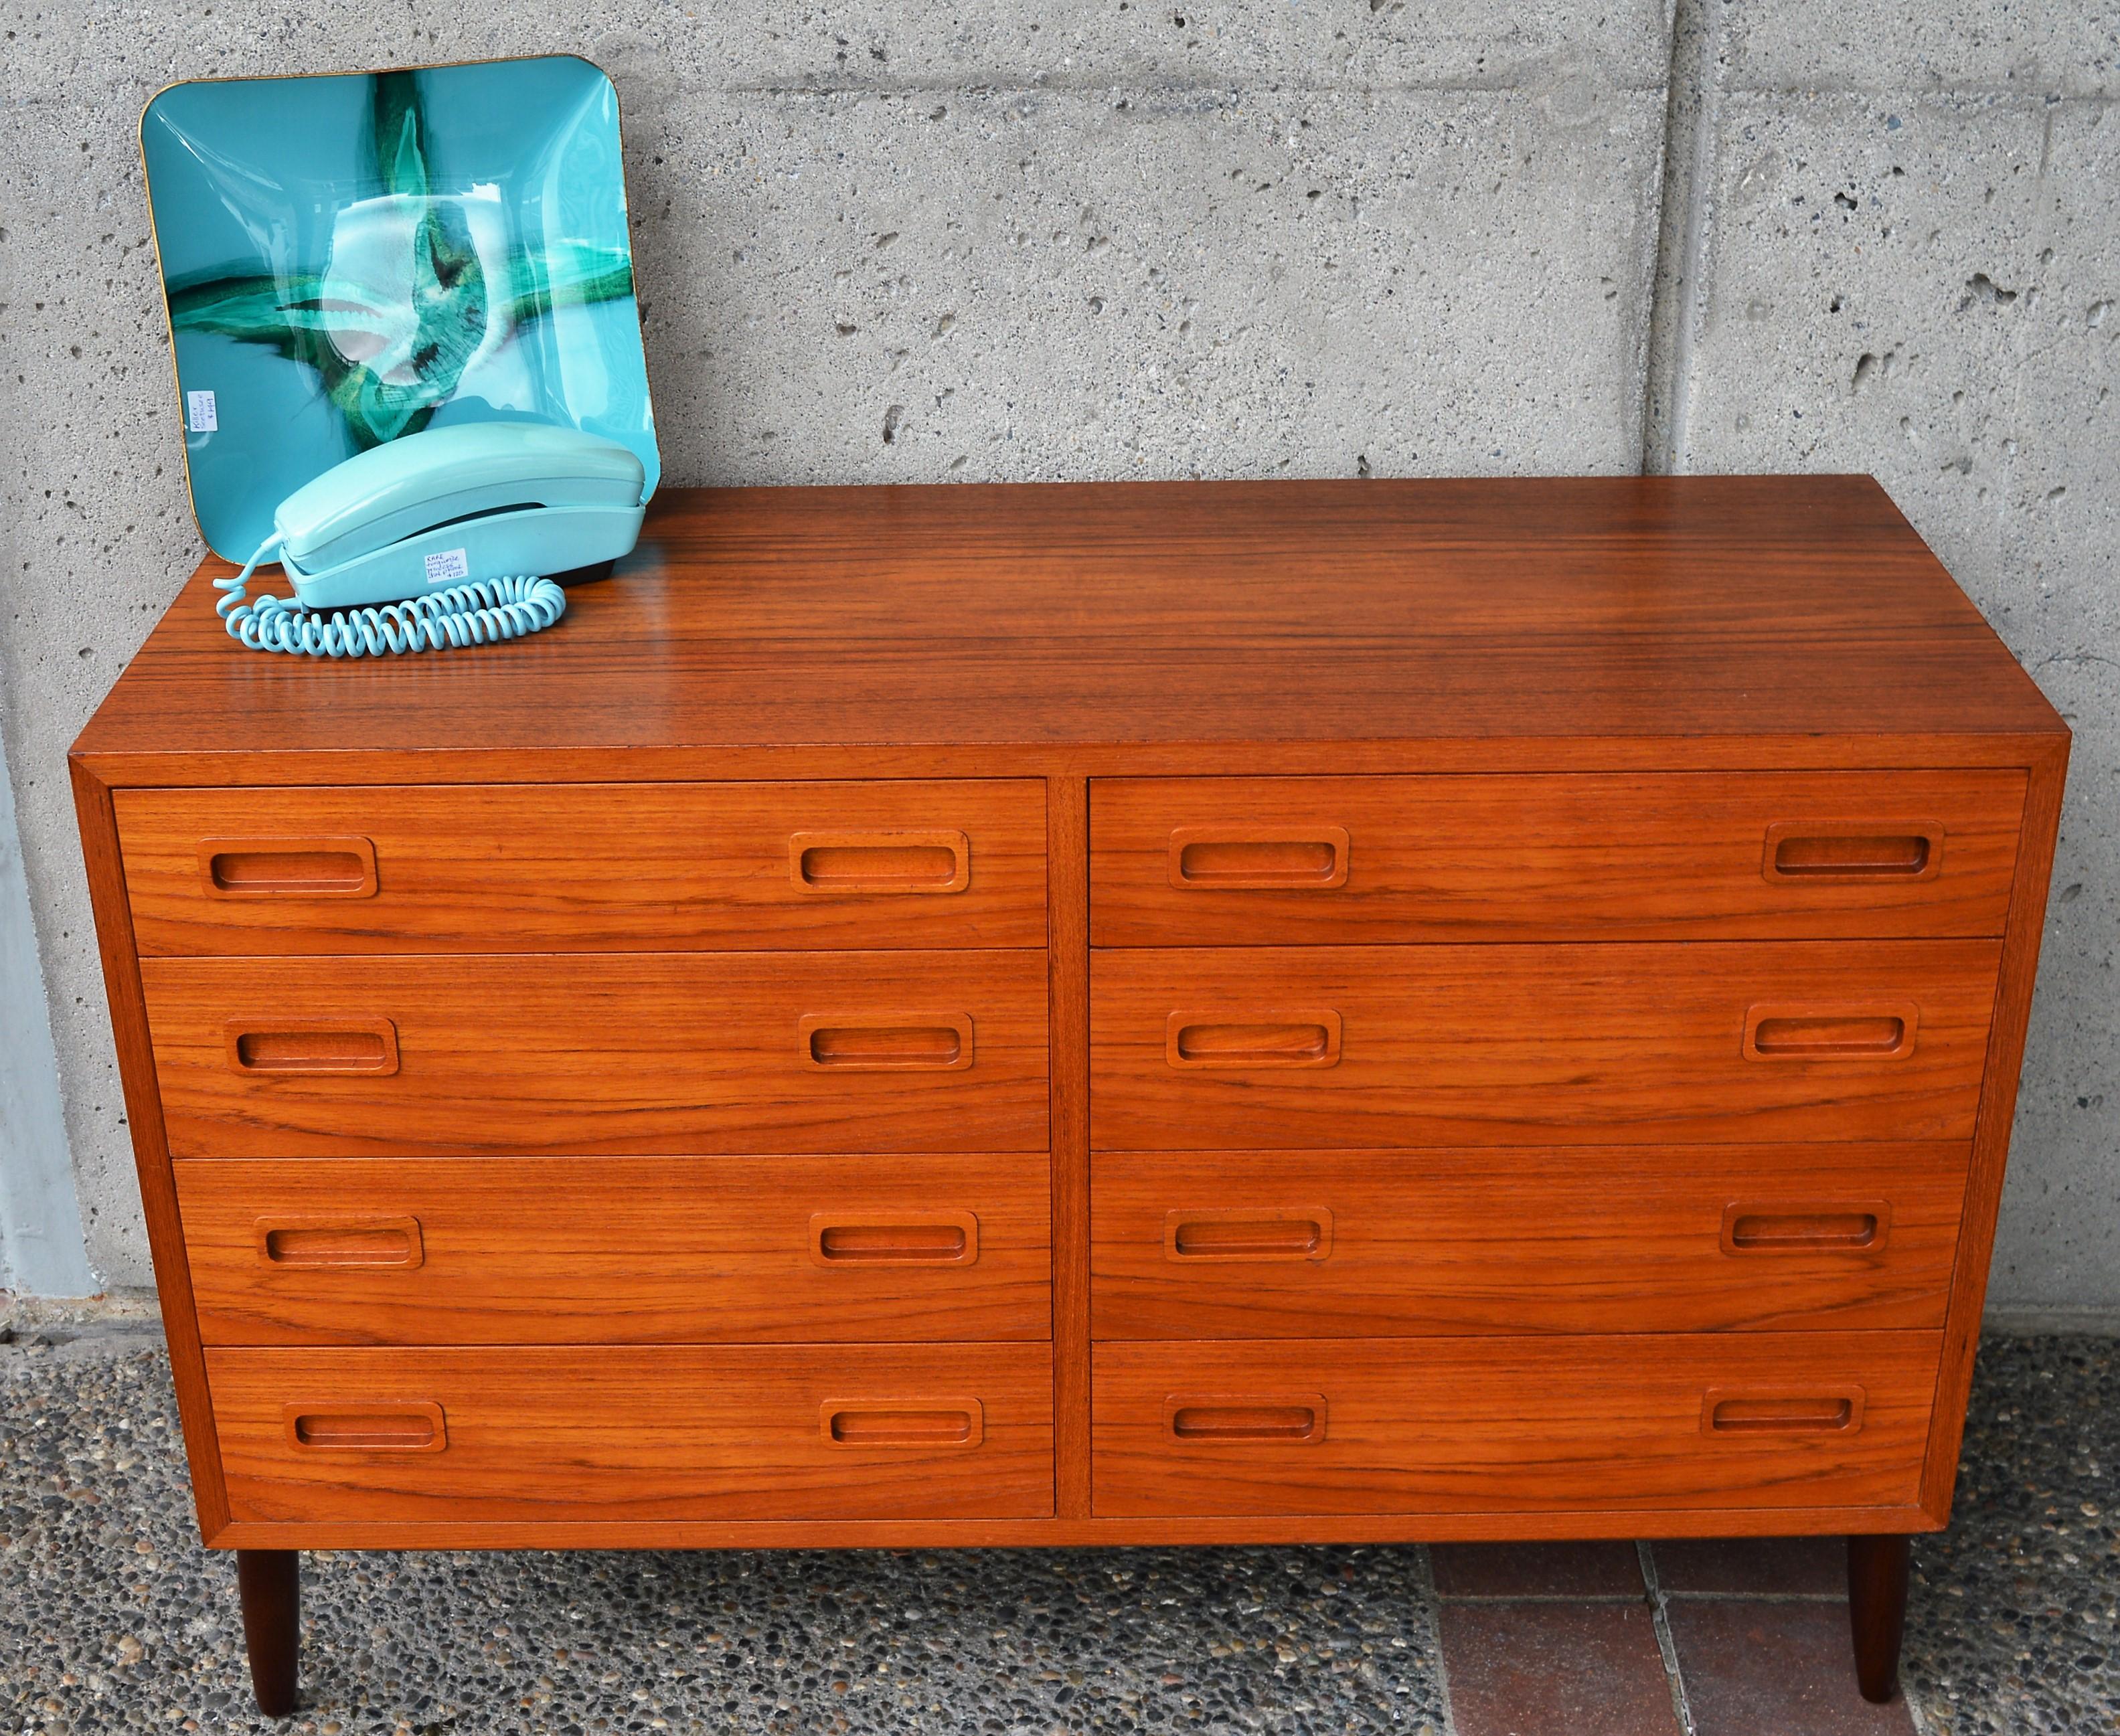 Quality Danish Teak Compact Dresser/Chest of Drawers with Legs by Hundevad & Co In Good Condition For Sale In New Westminster, British Columbia